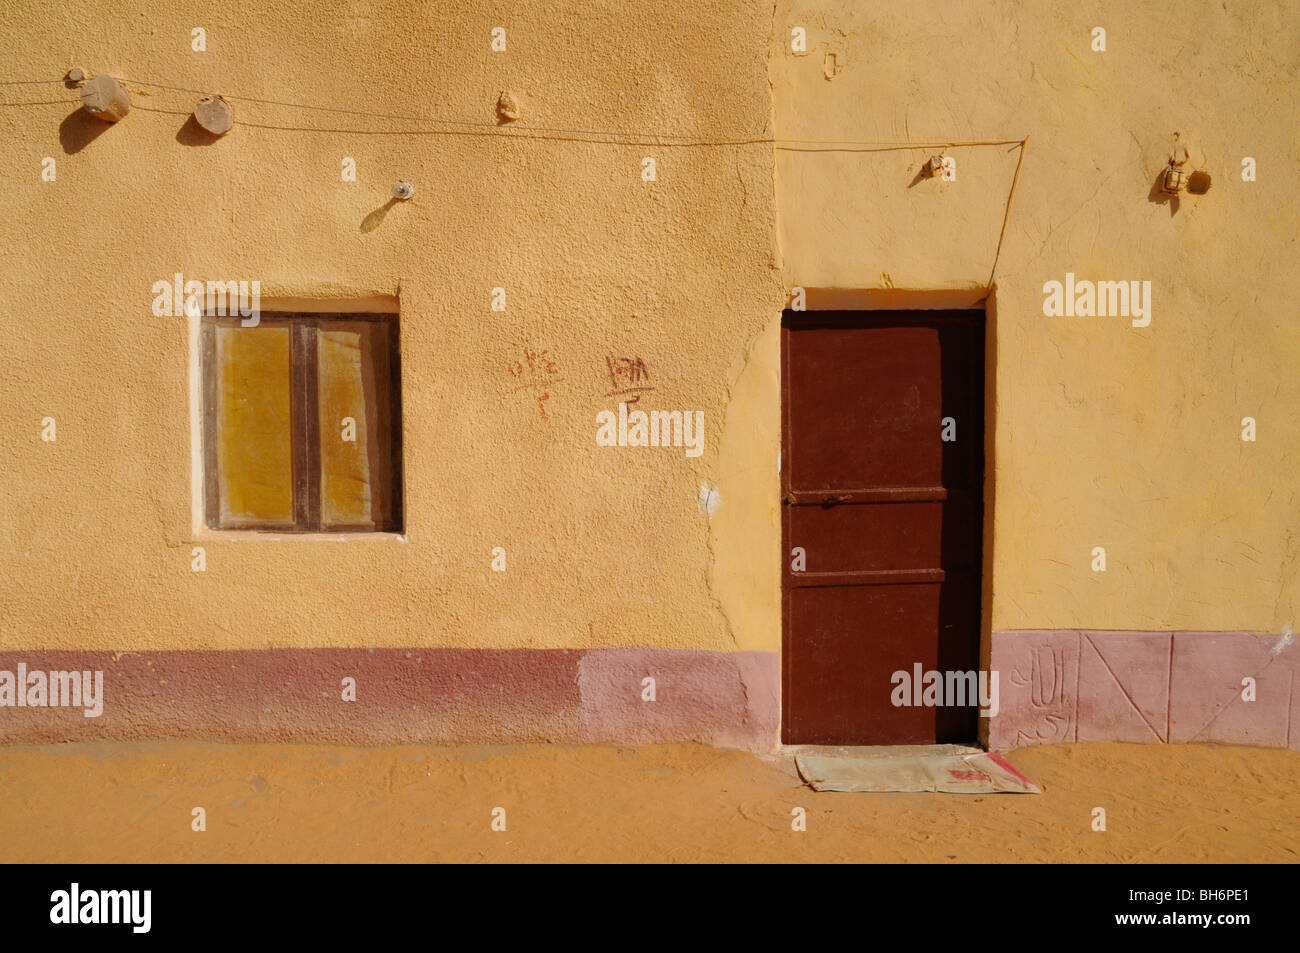 A small colorful house in the Saharan village of Balat in the Western Desert of the Sahara, Dakhla Oasis, New Valley Governorate, Egypt. Stock Photo